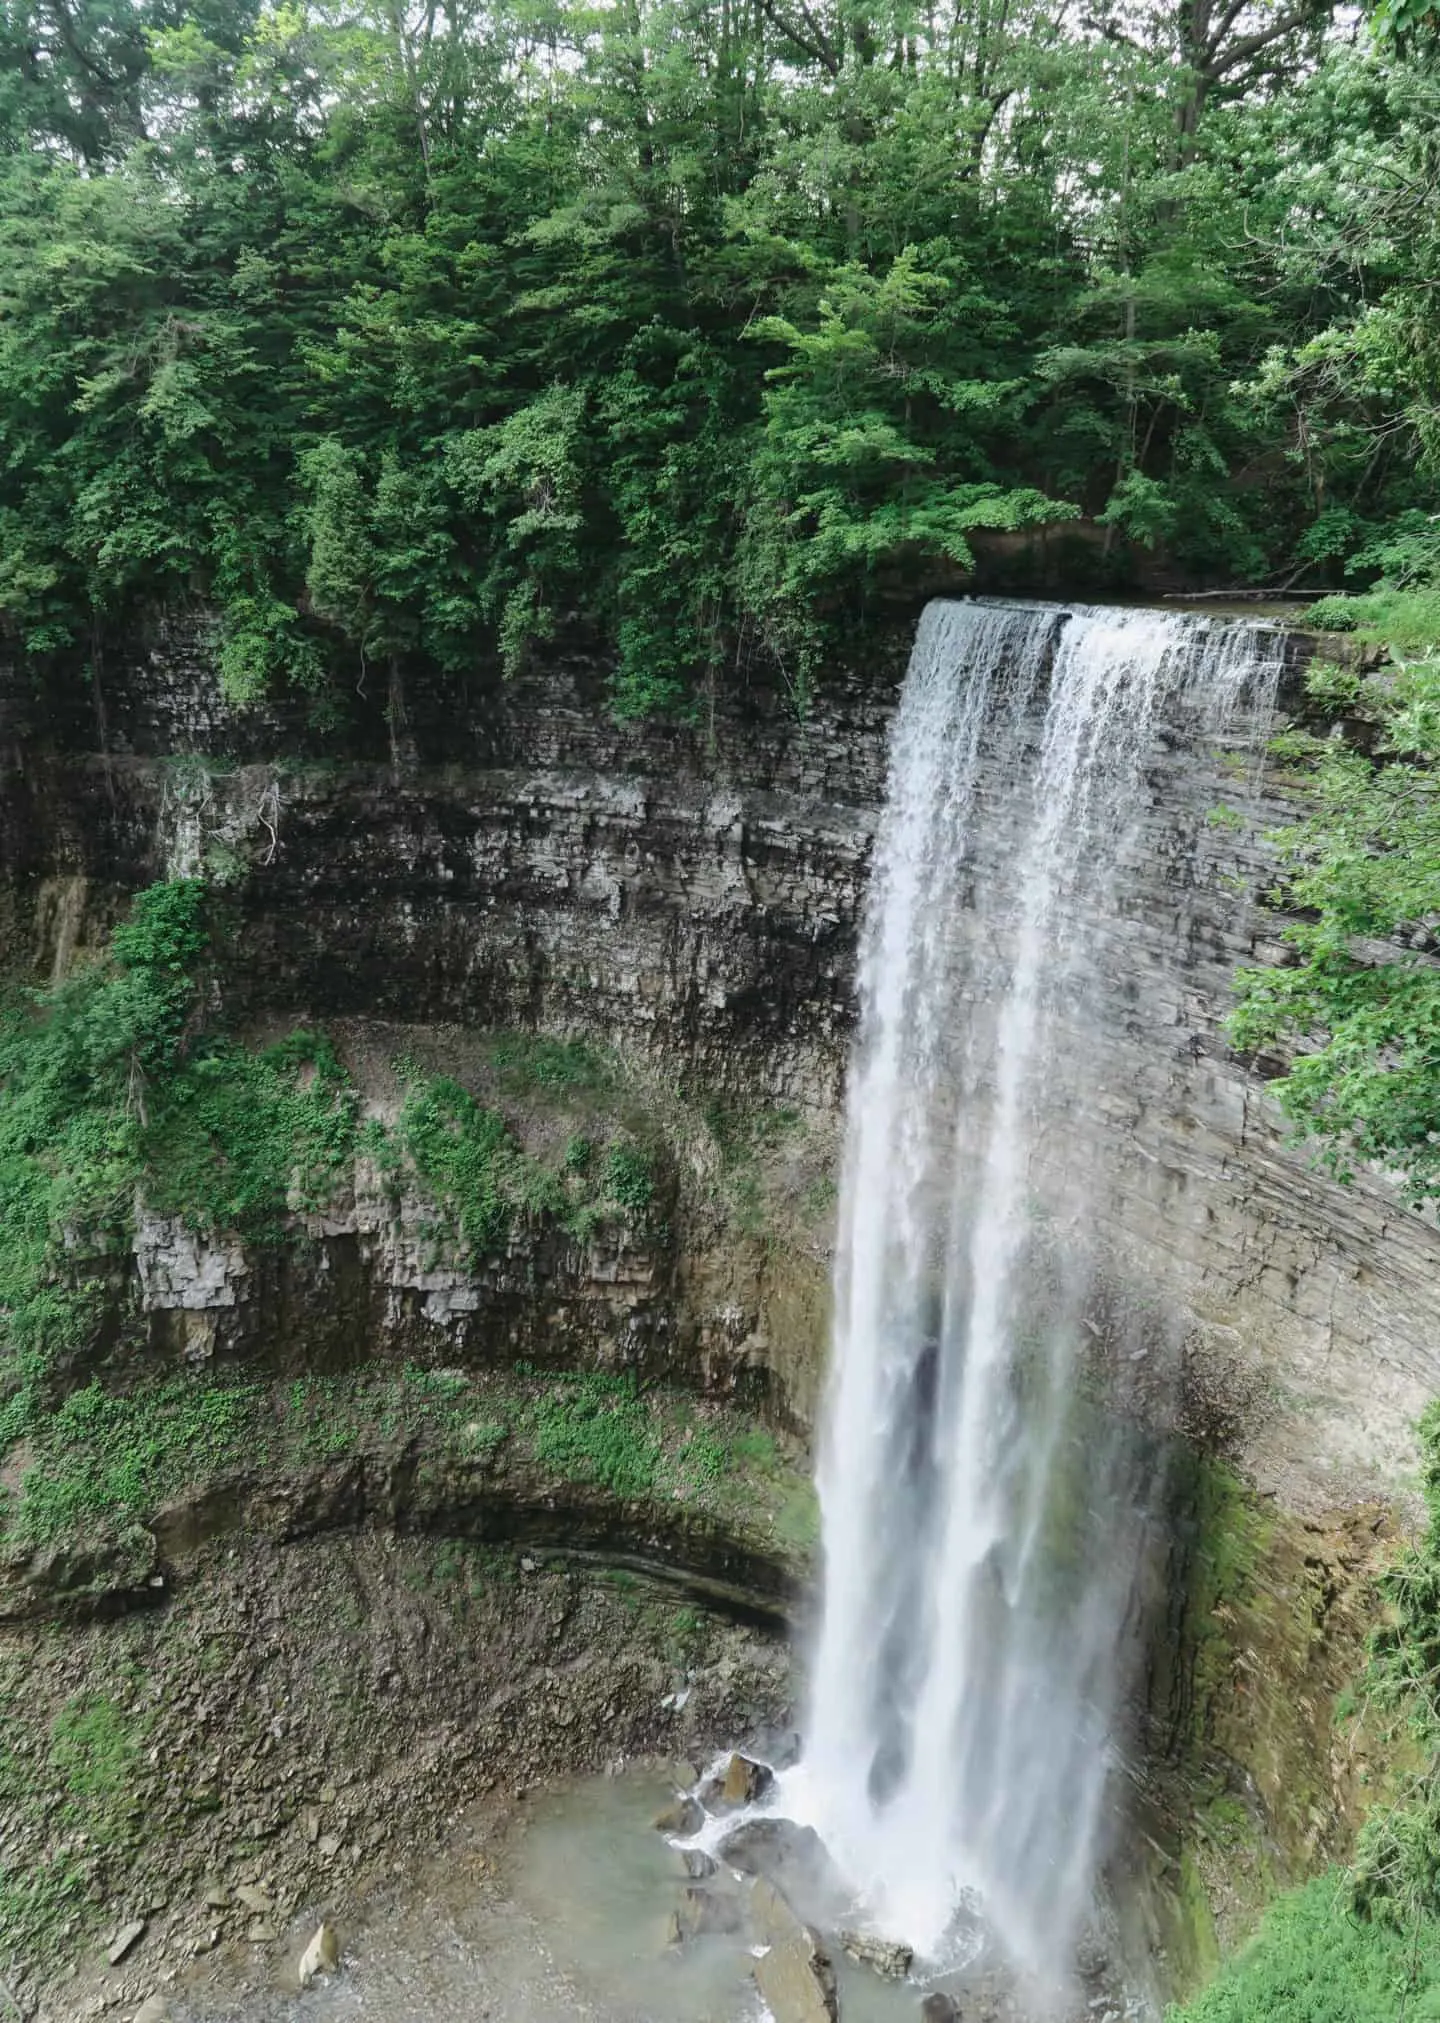 Seeing Hamilton's waterfalls is a great day trip to take from Toronto